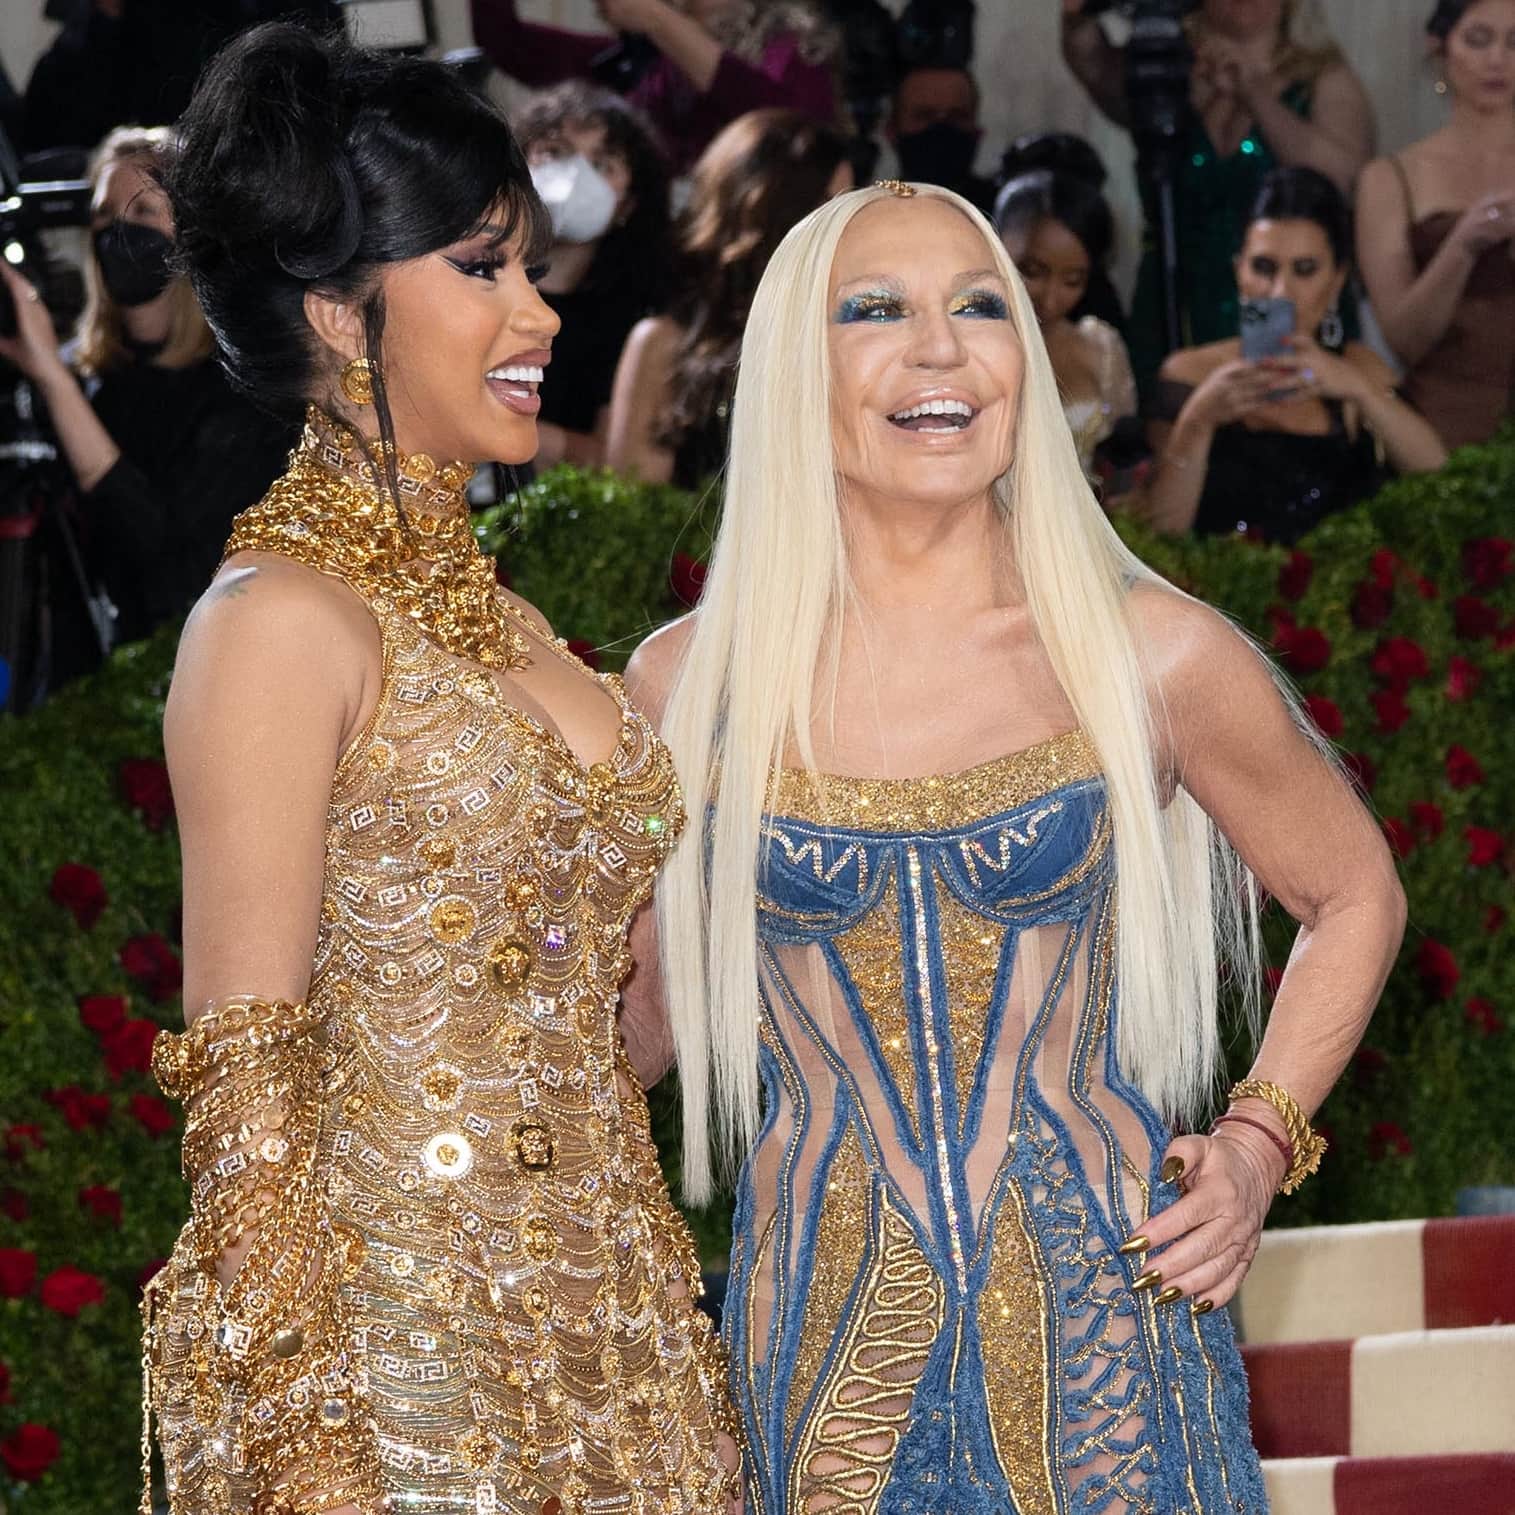 Cardi B was joined on the red carpet by Gianni Versace's sister Donatella Francesca Versace